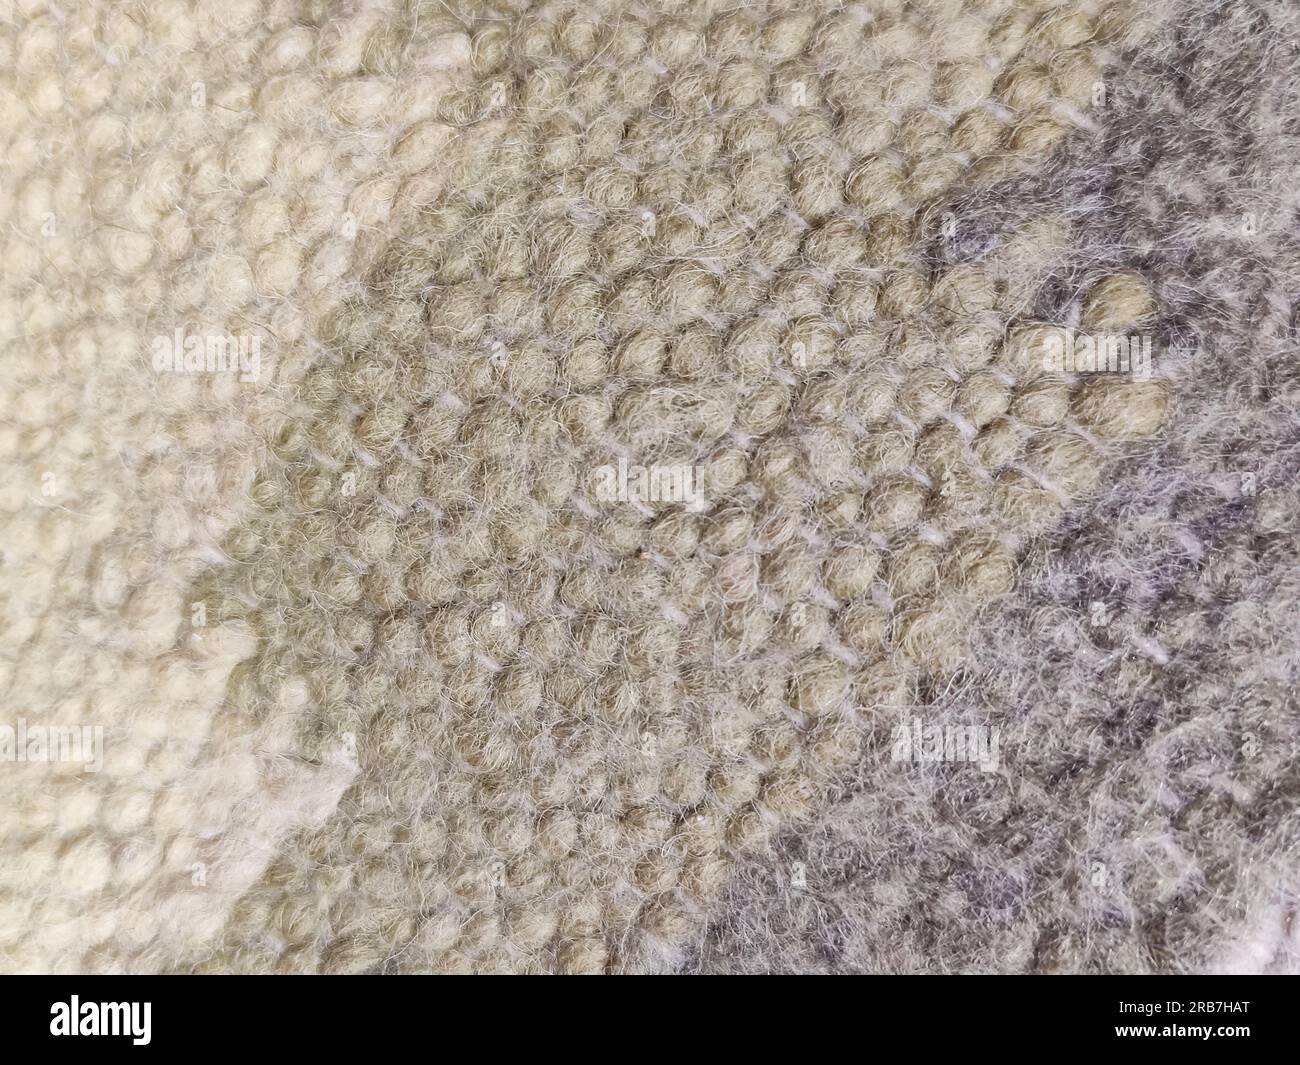 Multicolored woolen knitted fabric with geometric pattern as a background, full frame. Natural wool fabric has a soft and slightly fuzzy texture Stock Photo